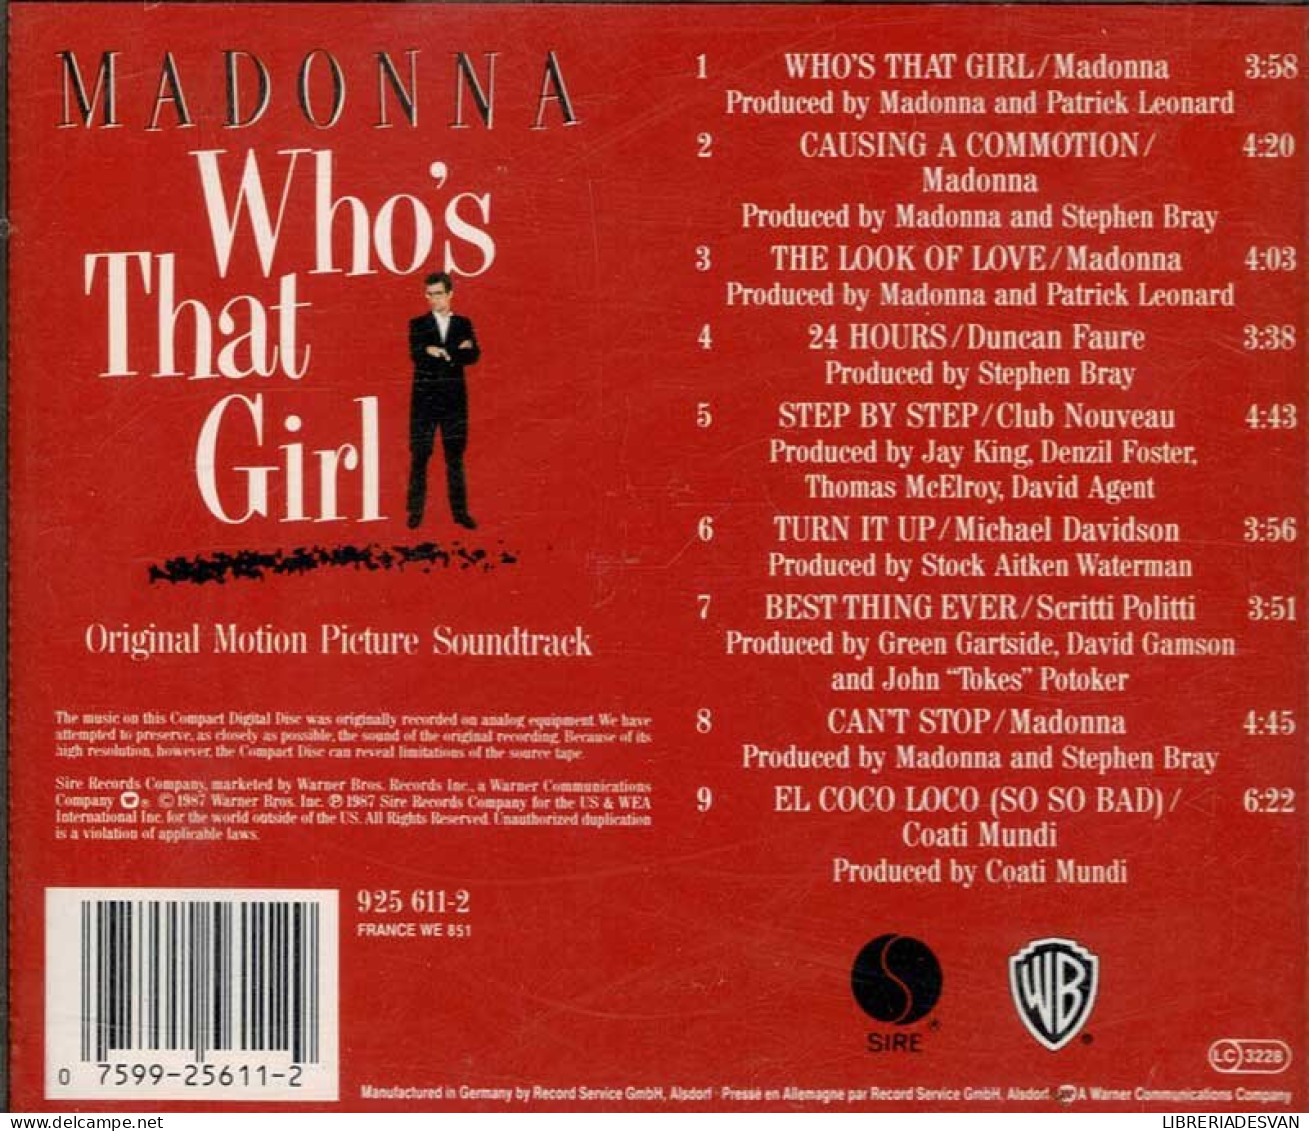 Madonna - Who's That Girl (Original Motion Picture Soundtrack). CD - Filmmusik